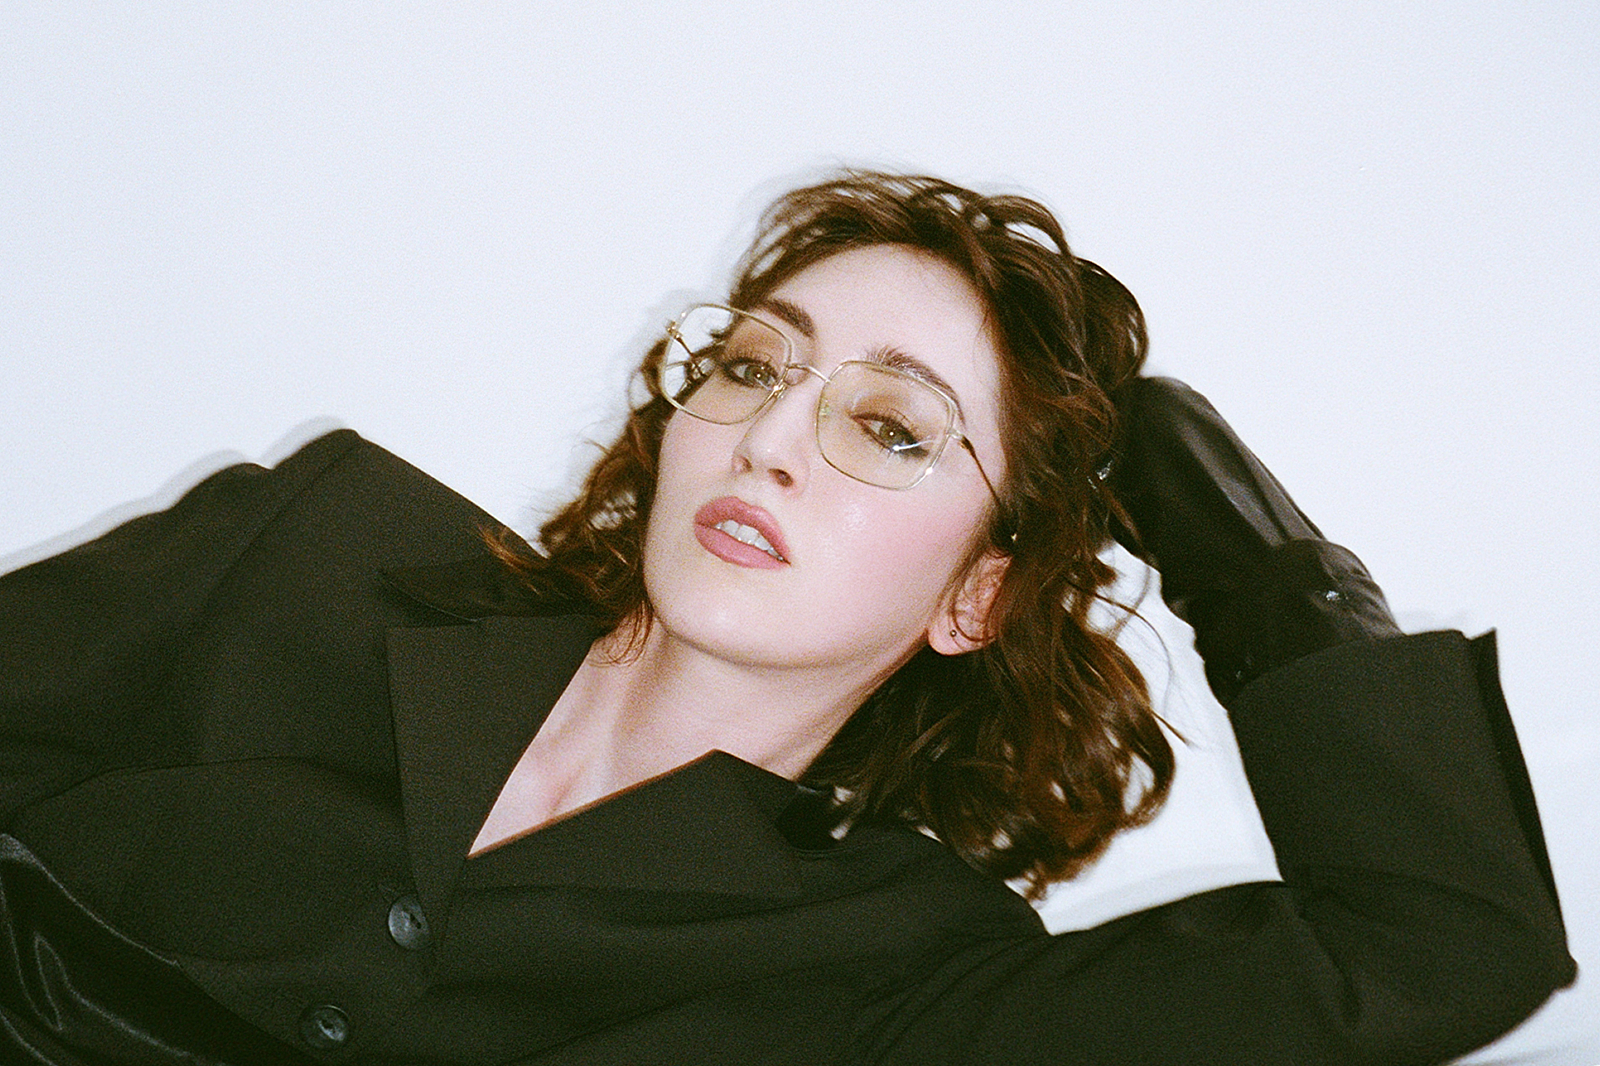 Jessica Winter teams up with Lynks for new track 'Clutter'